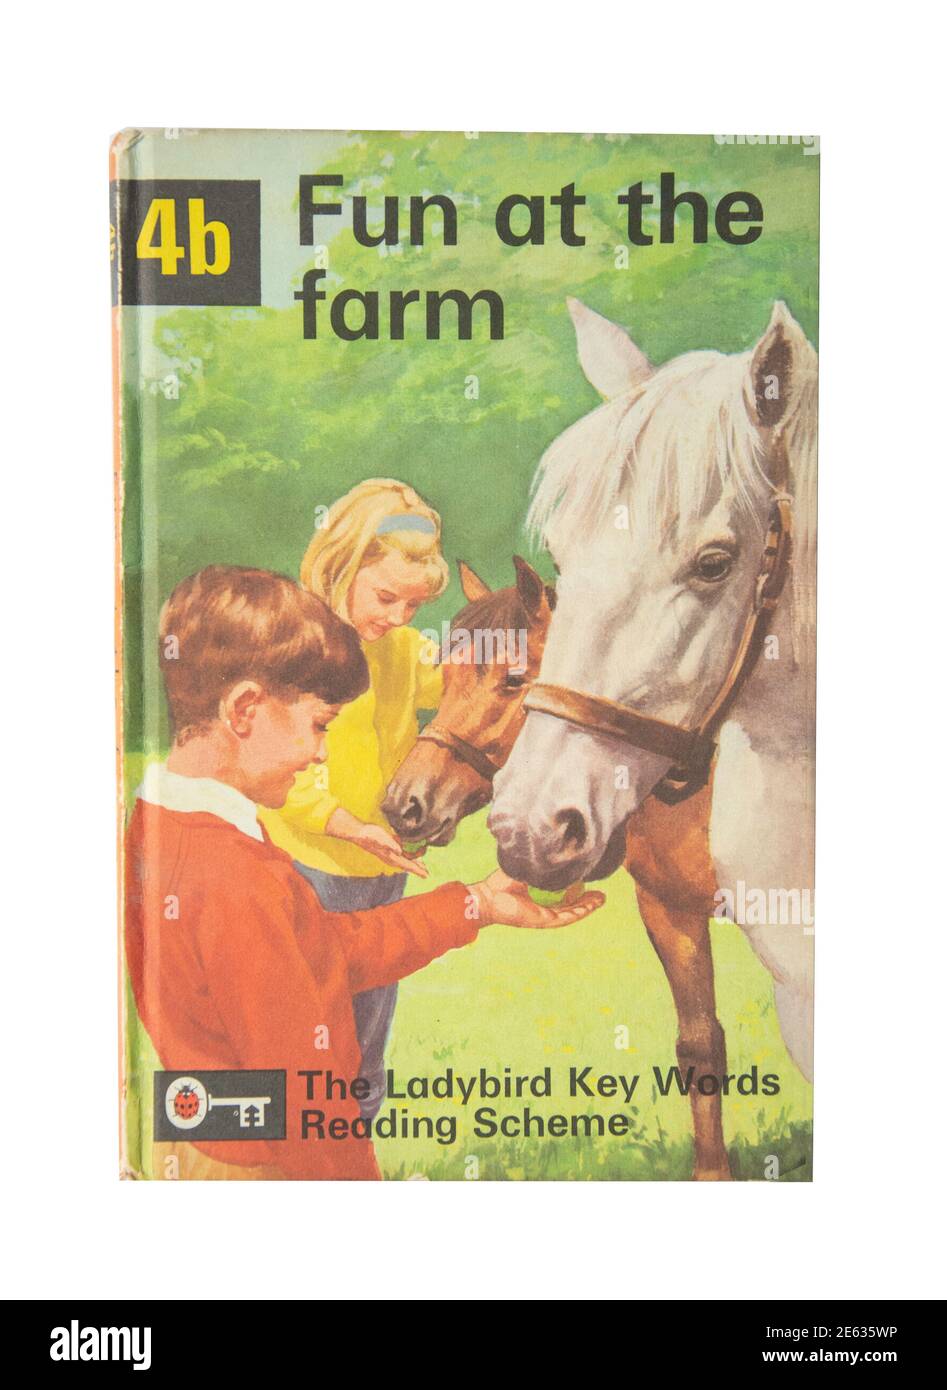 The Ladybird Key Words book 'Fun at the Farm', Surrey, Angleterre, Royaume-Uni Banque D'Images